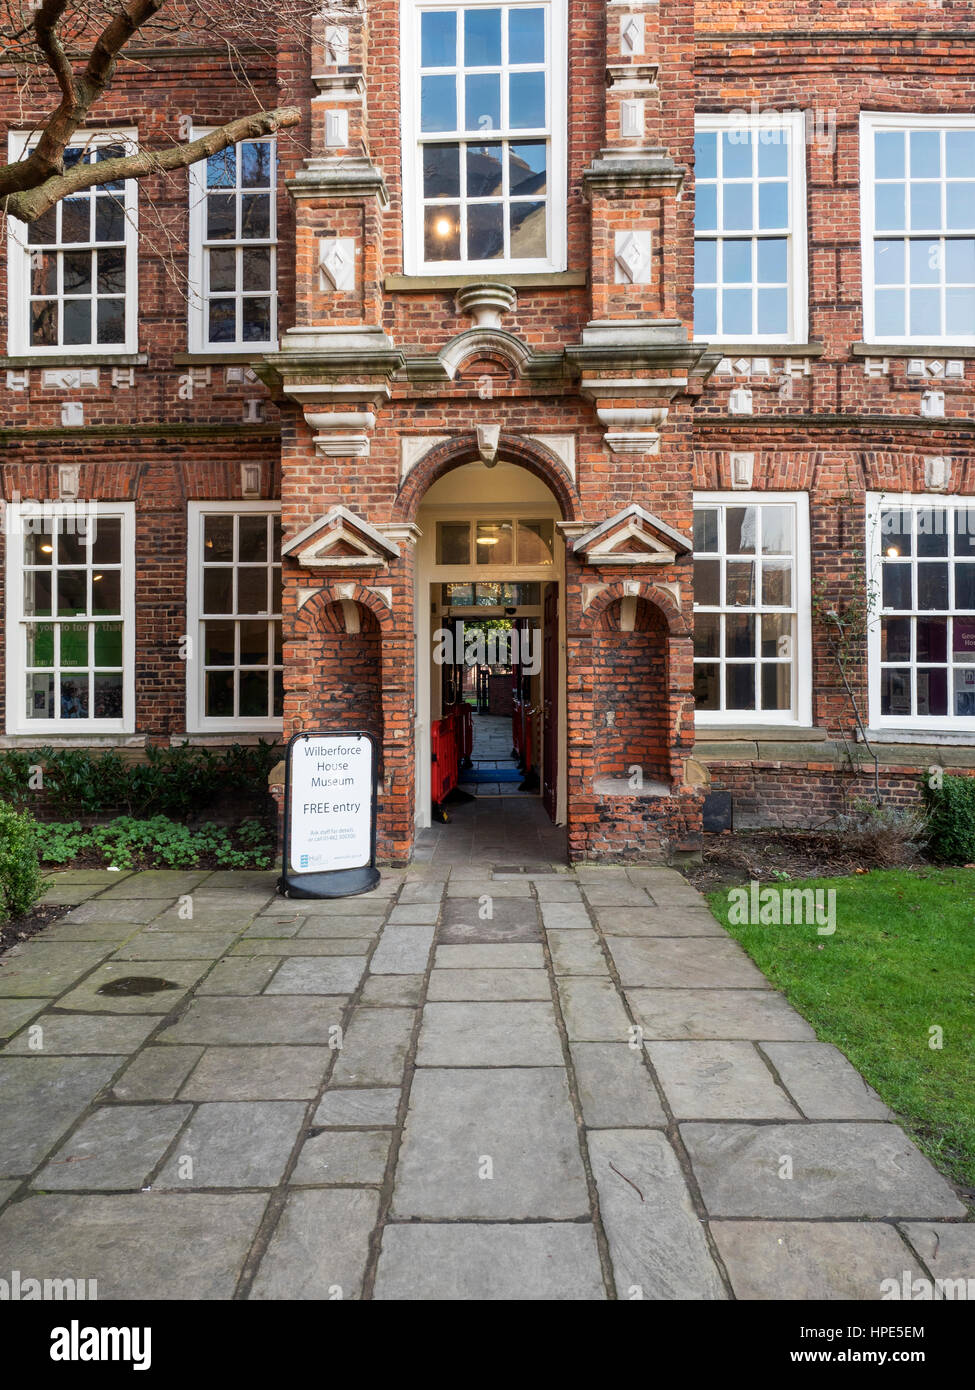 Wilberforce House Museum in Hull Yorkshire England Stockfoto